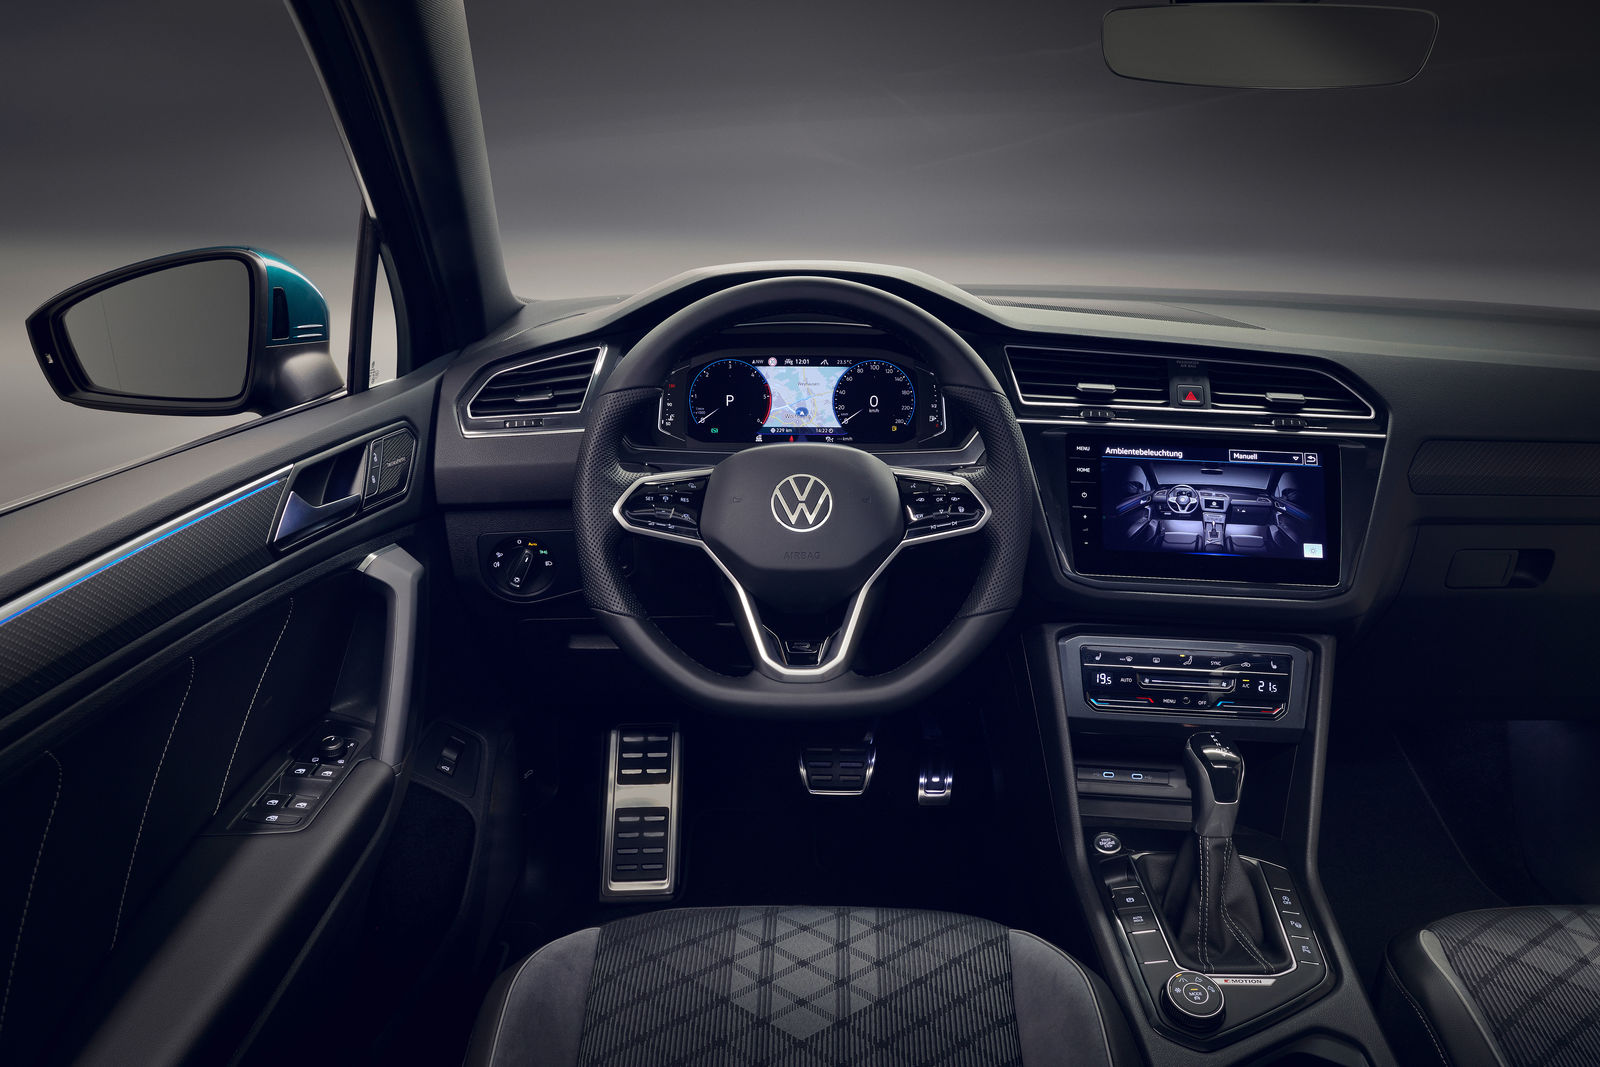 Volkswagen Tiguan RLine Is The Sporty And Stylish Sibling Of The Standard  Tiguan SUV  Motoroids